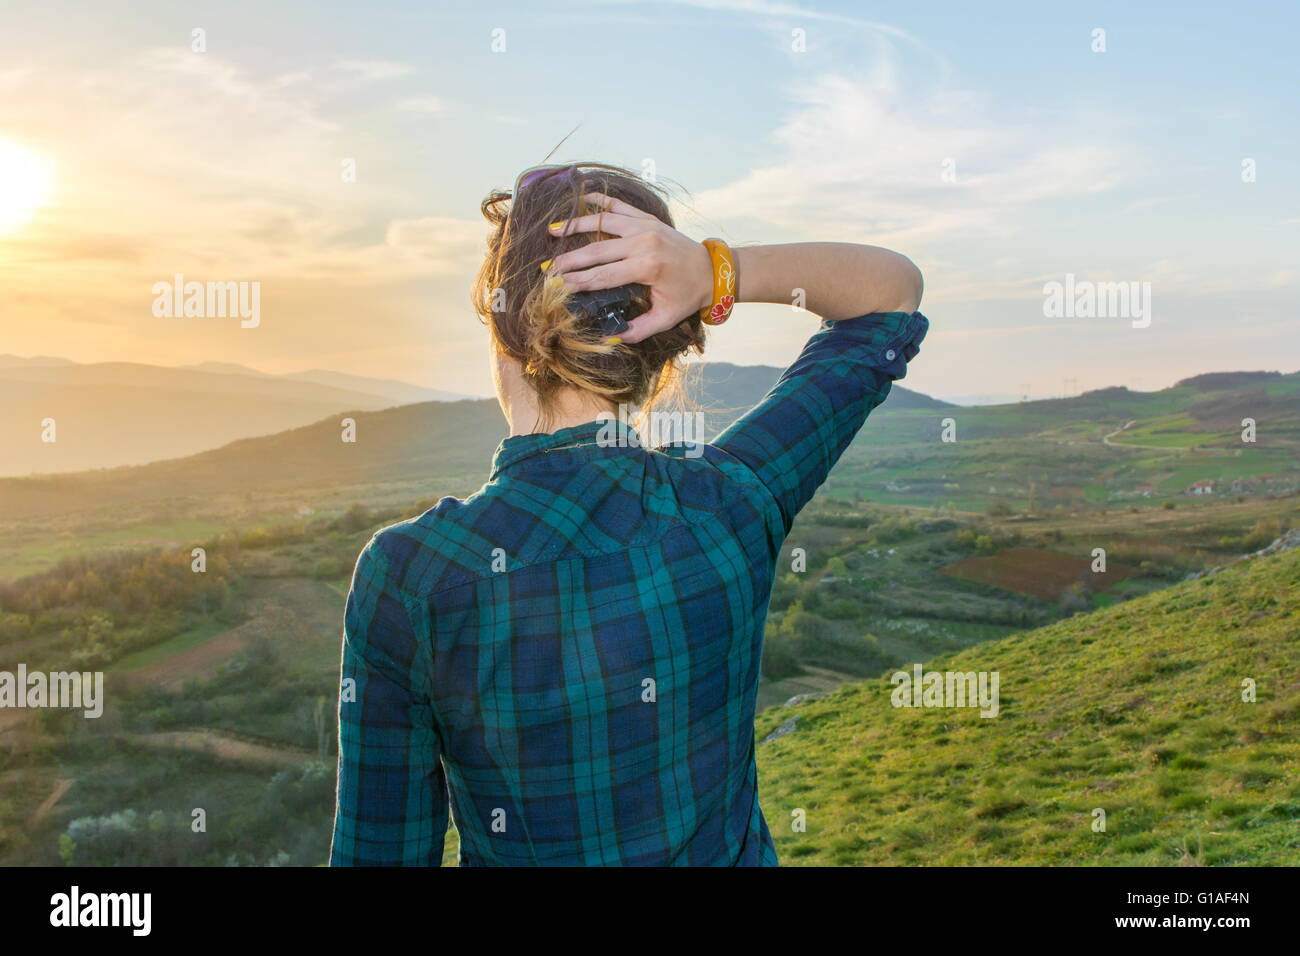 Girl on hiking trip enjoying the sunset view from above Stock Photo